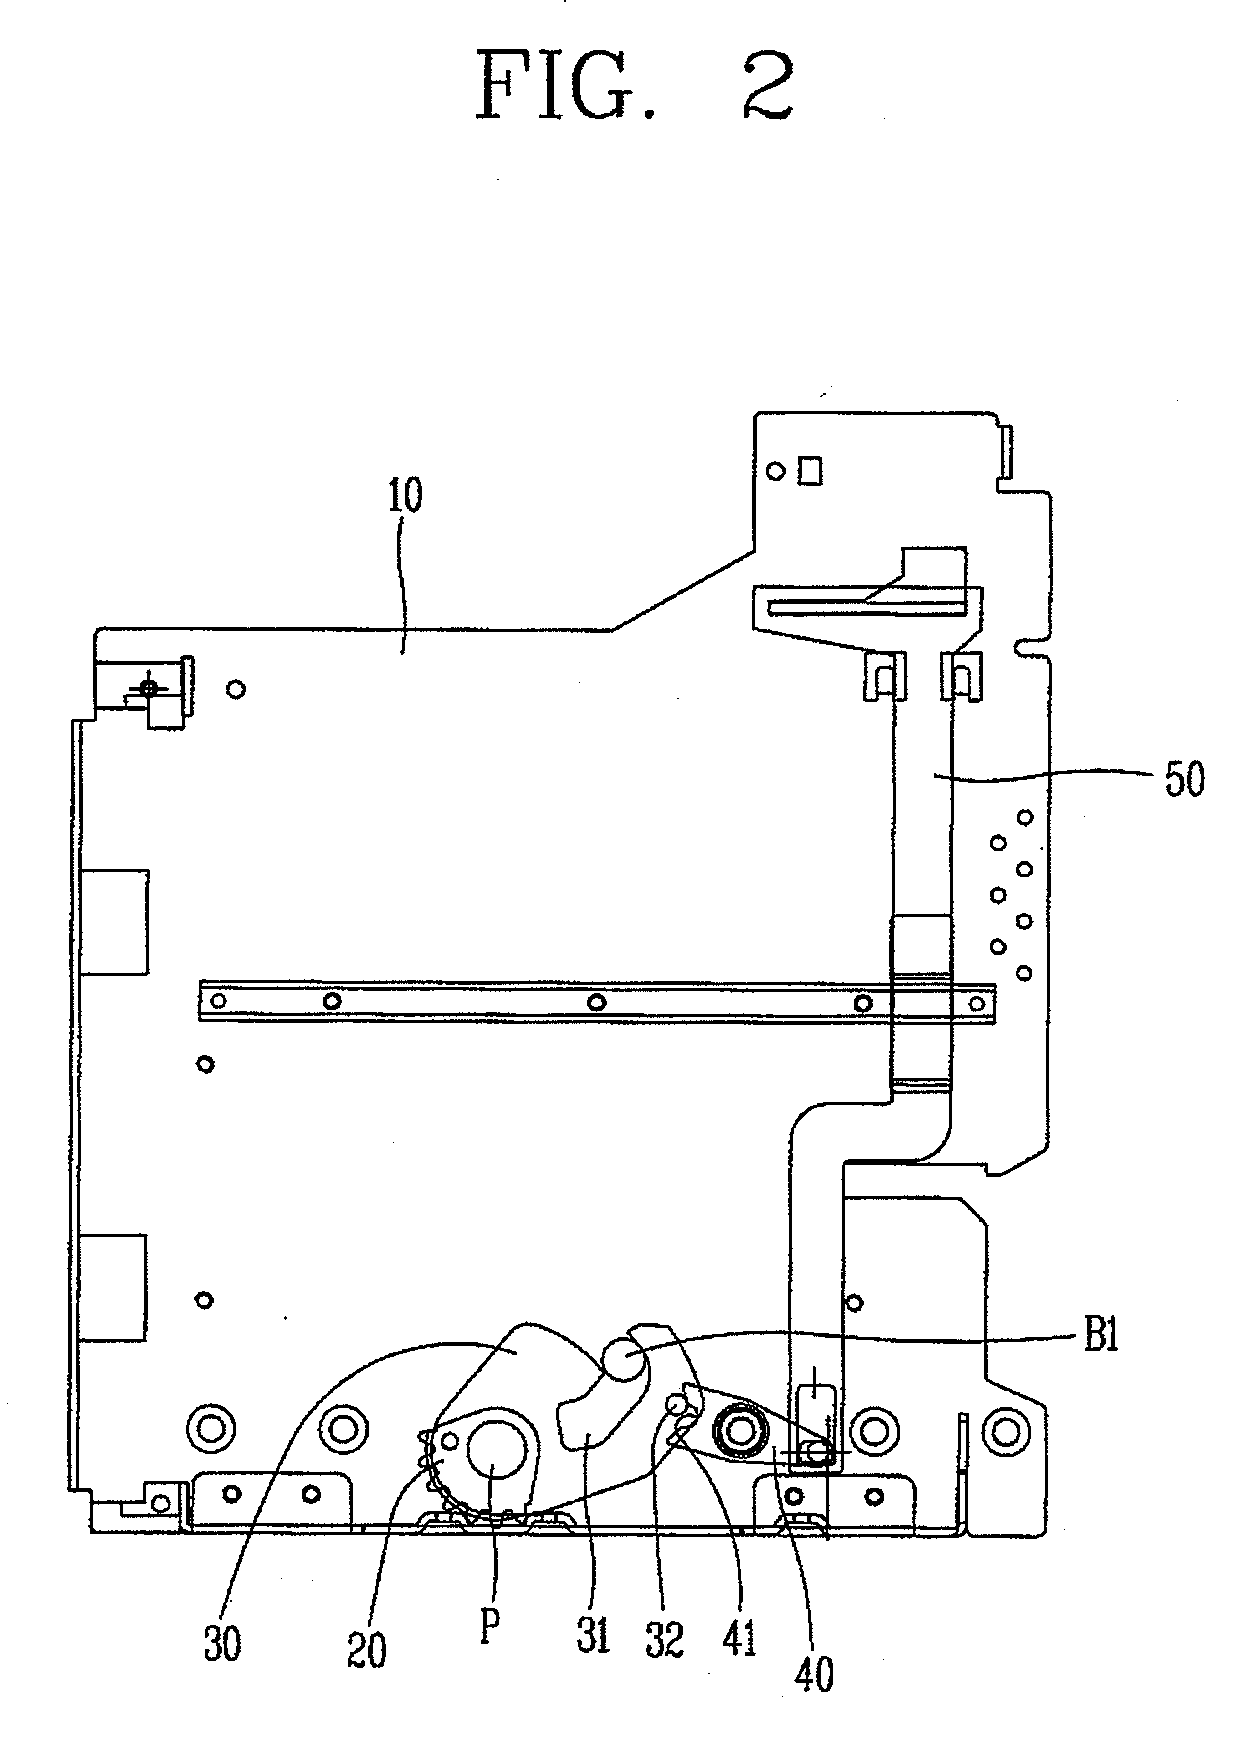 Draw in-out apparatus for air circuit breaker